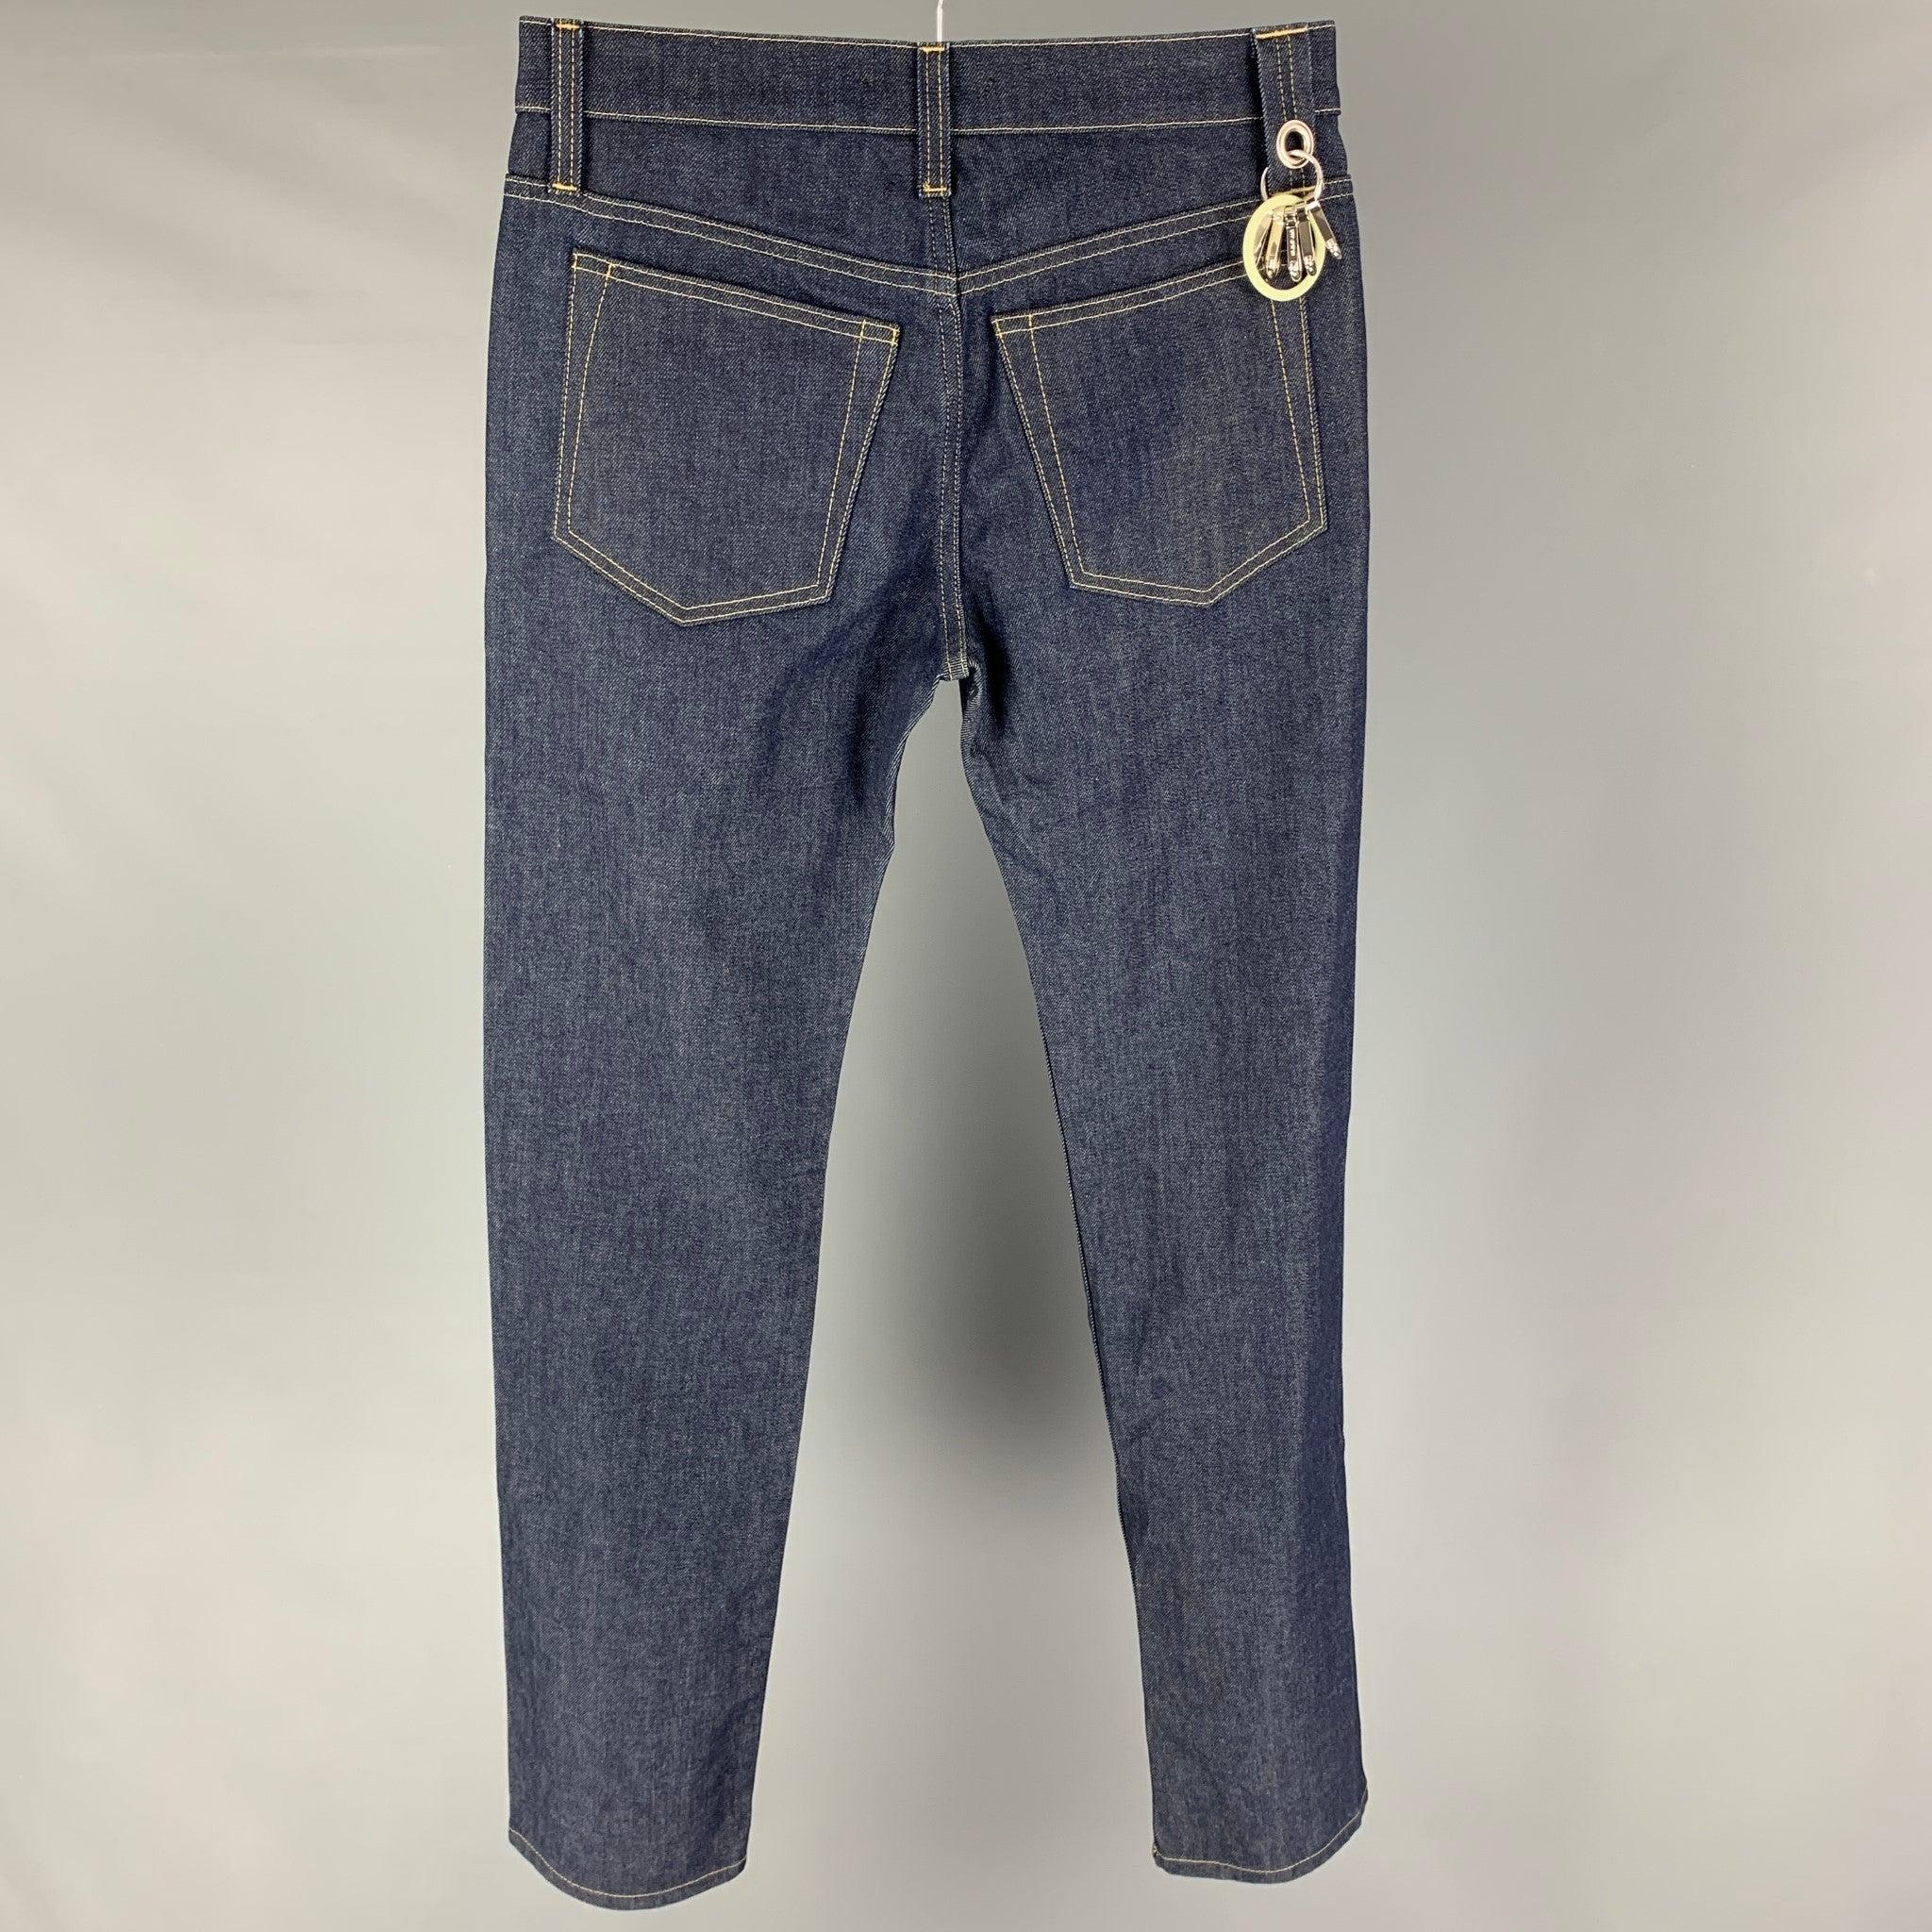 HELMUT LANG jeans comes in a blue cotton featuring a slim straight fit, contrast stitching, multi key rings, and a button fly closure. Made in Italy.
Excellent
Pre-Owned Condition. 

Marked:   30 

Measurements: 
  Waist: 30 inches Rise: 10 inches